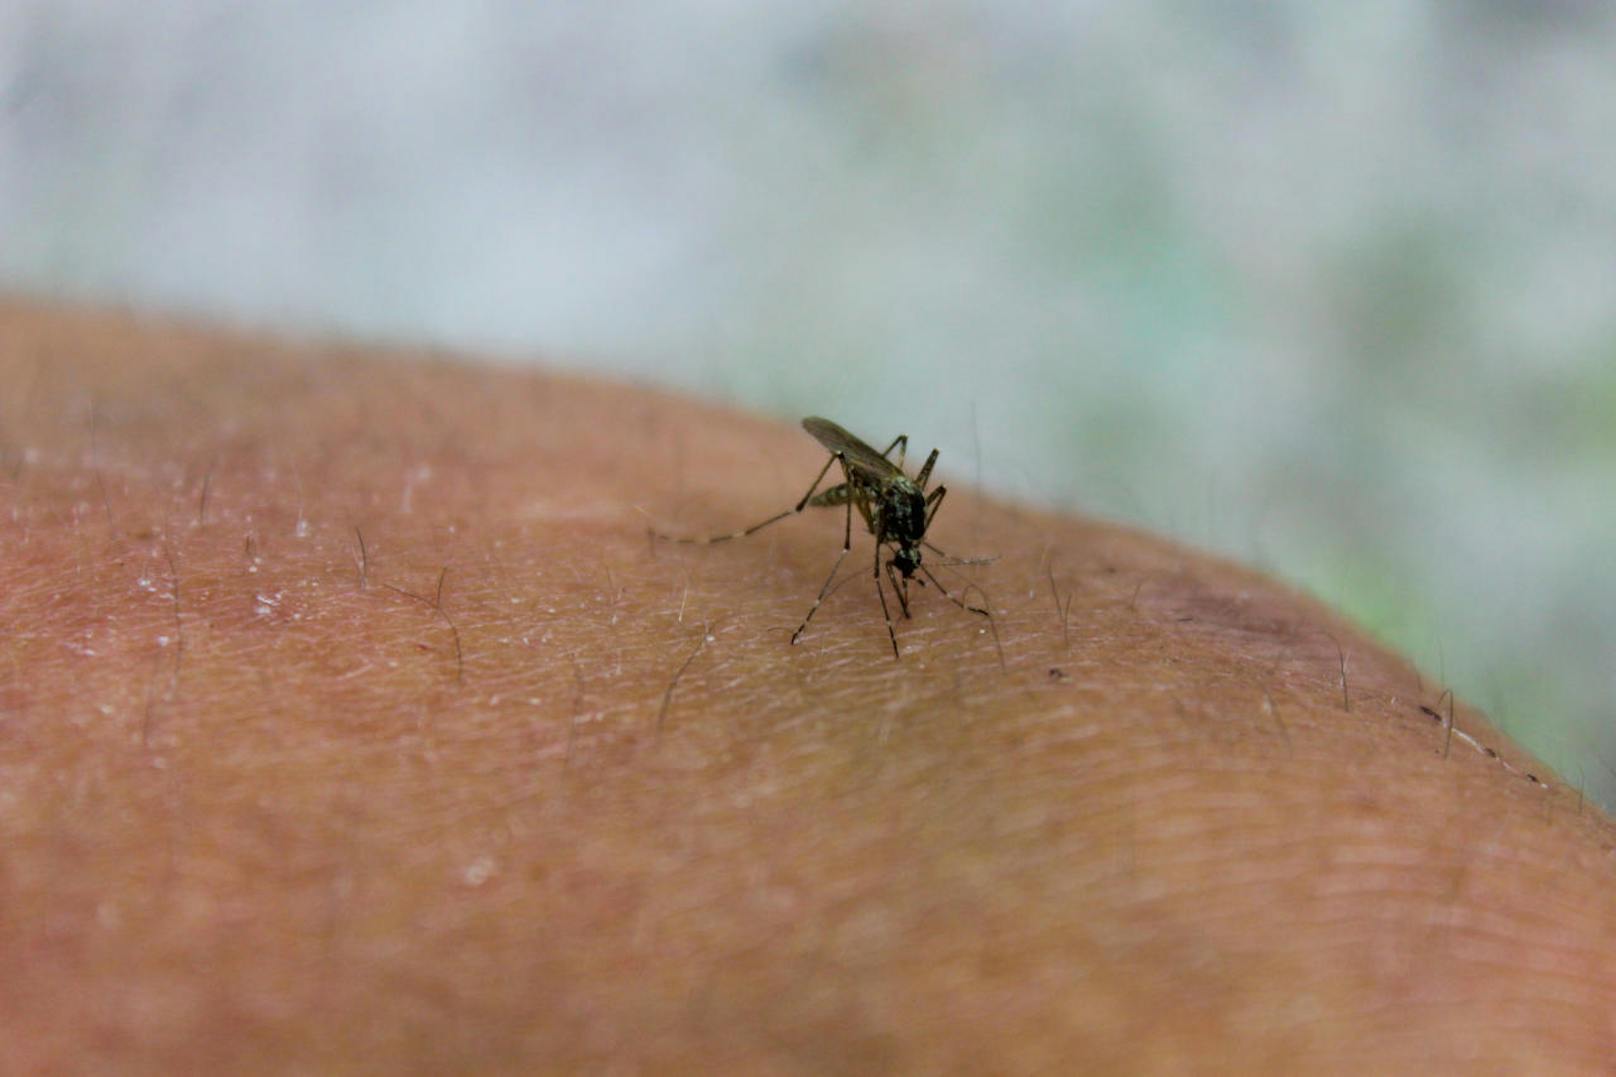 Mosquito (Culex pipiens) feeds on the blood of the human body